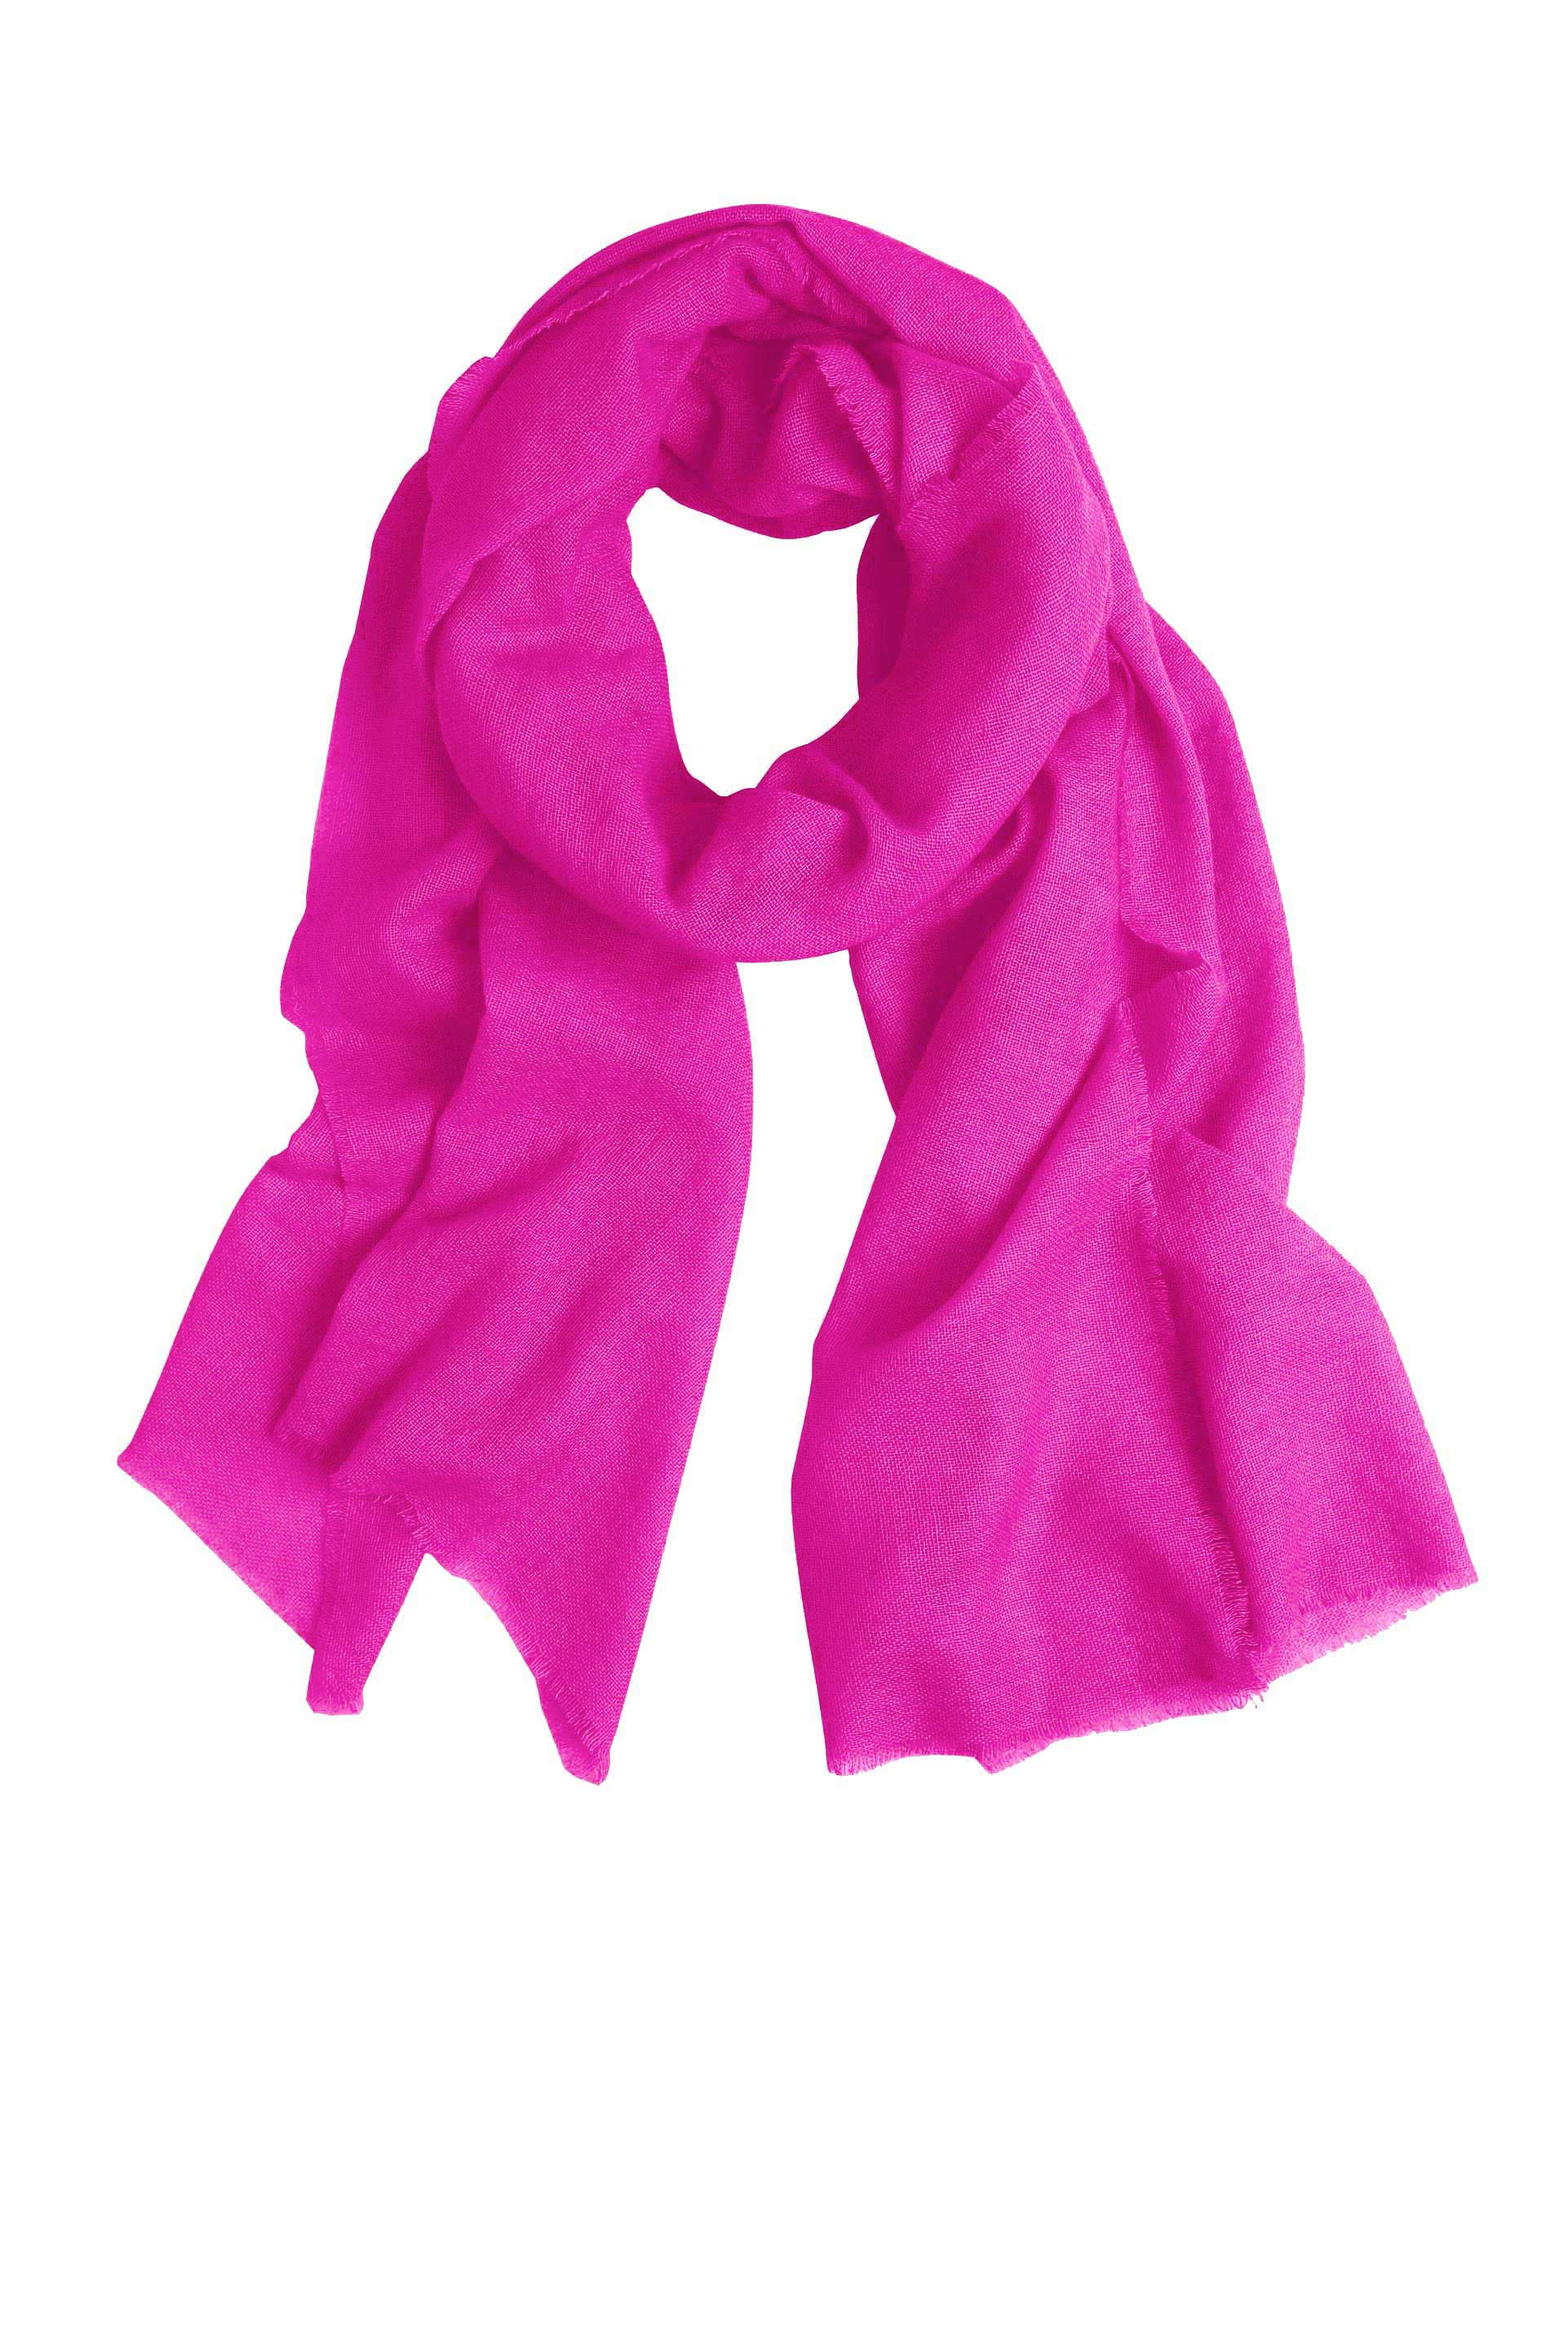 53028_cashmere_gauze_stole_electric_pink_ct1937.jpg